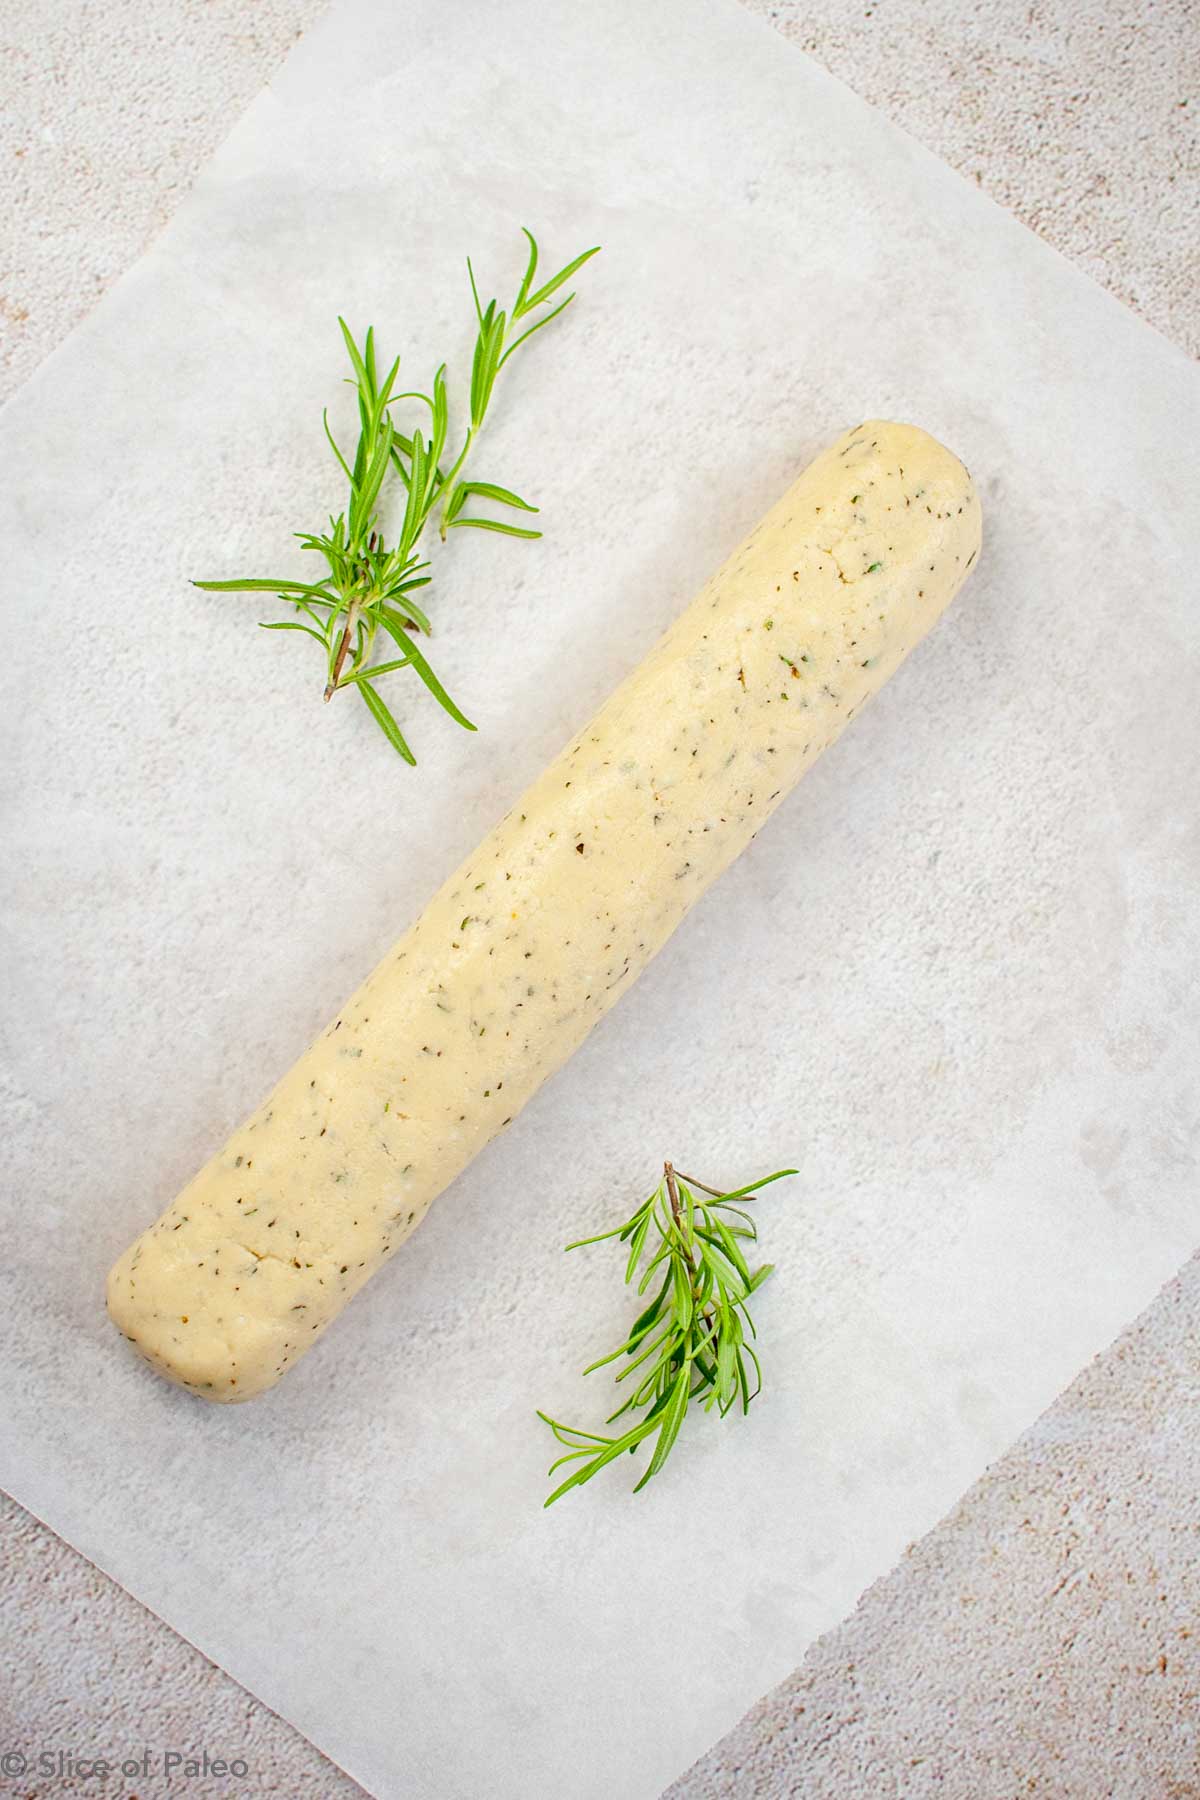 Paleo Rosemary Shortbread dough rolled out